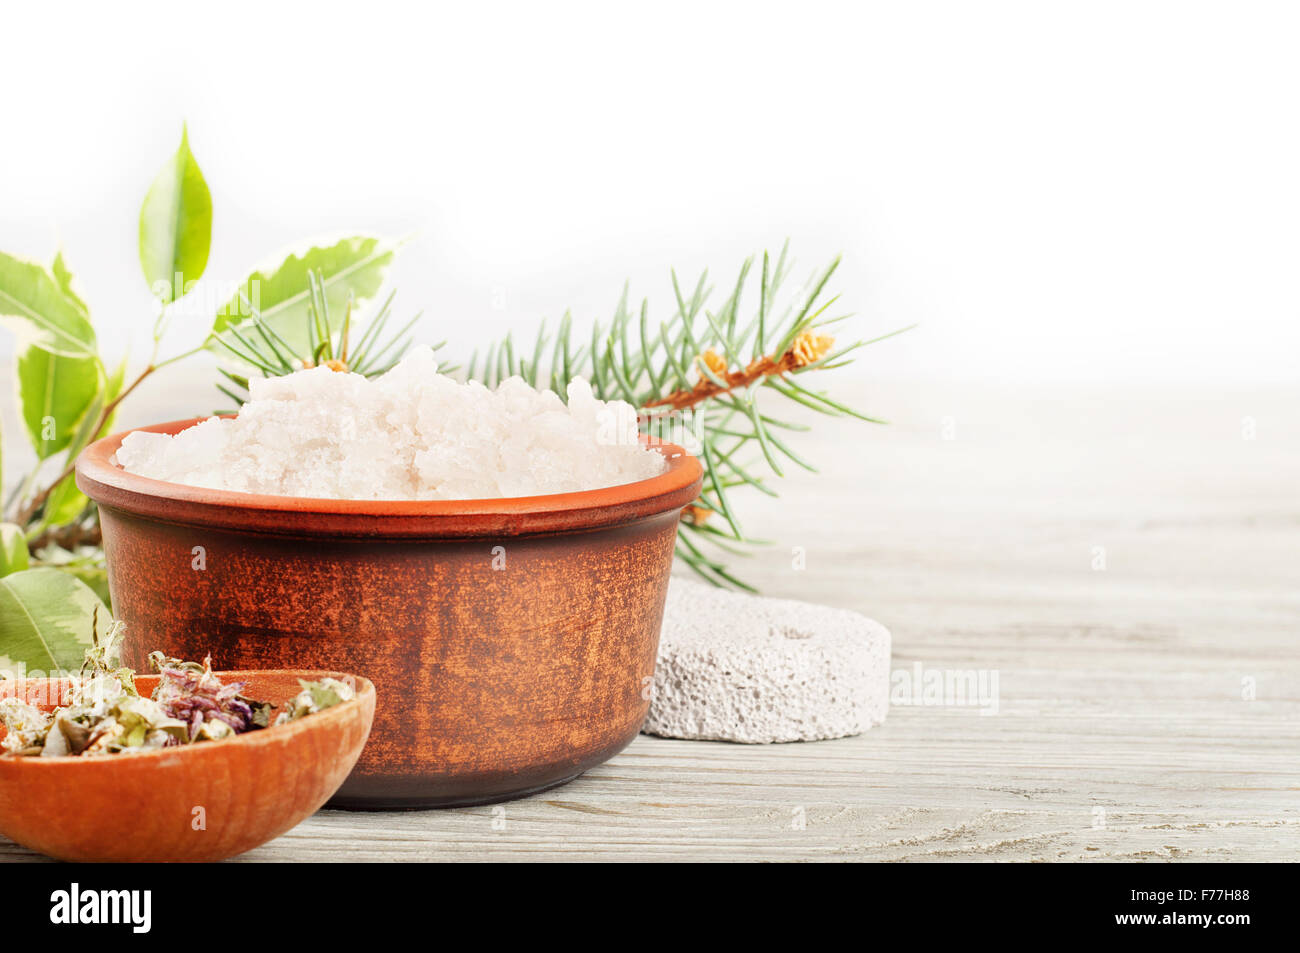 Aromatic bath salt and dried herbs on a wooden surface Stock Photo